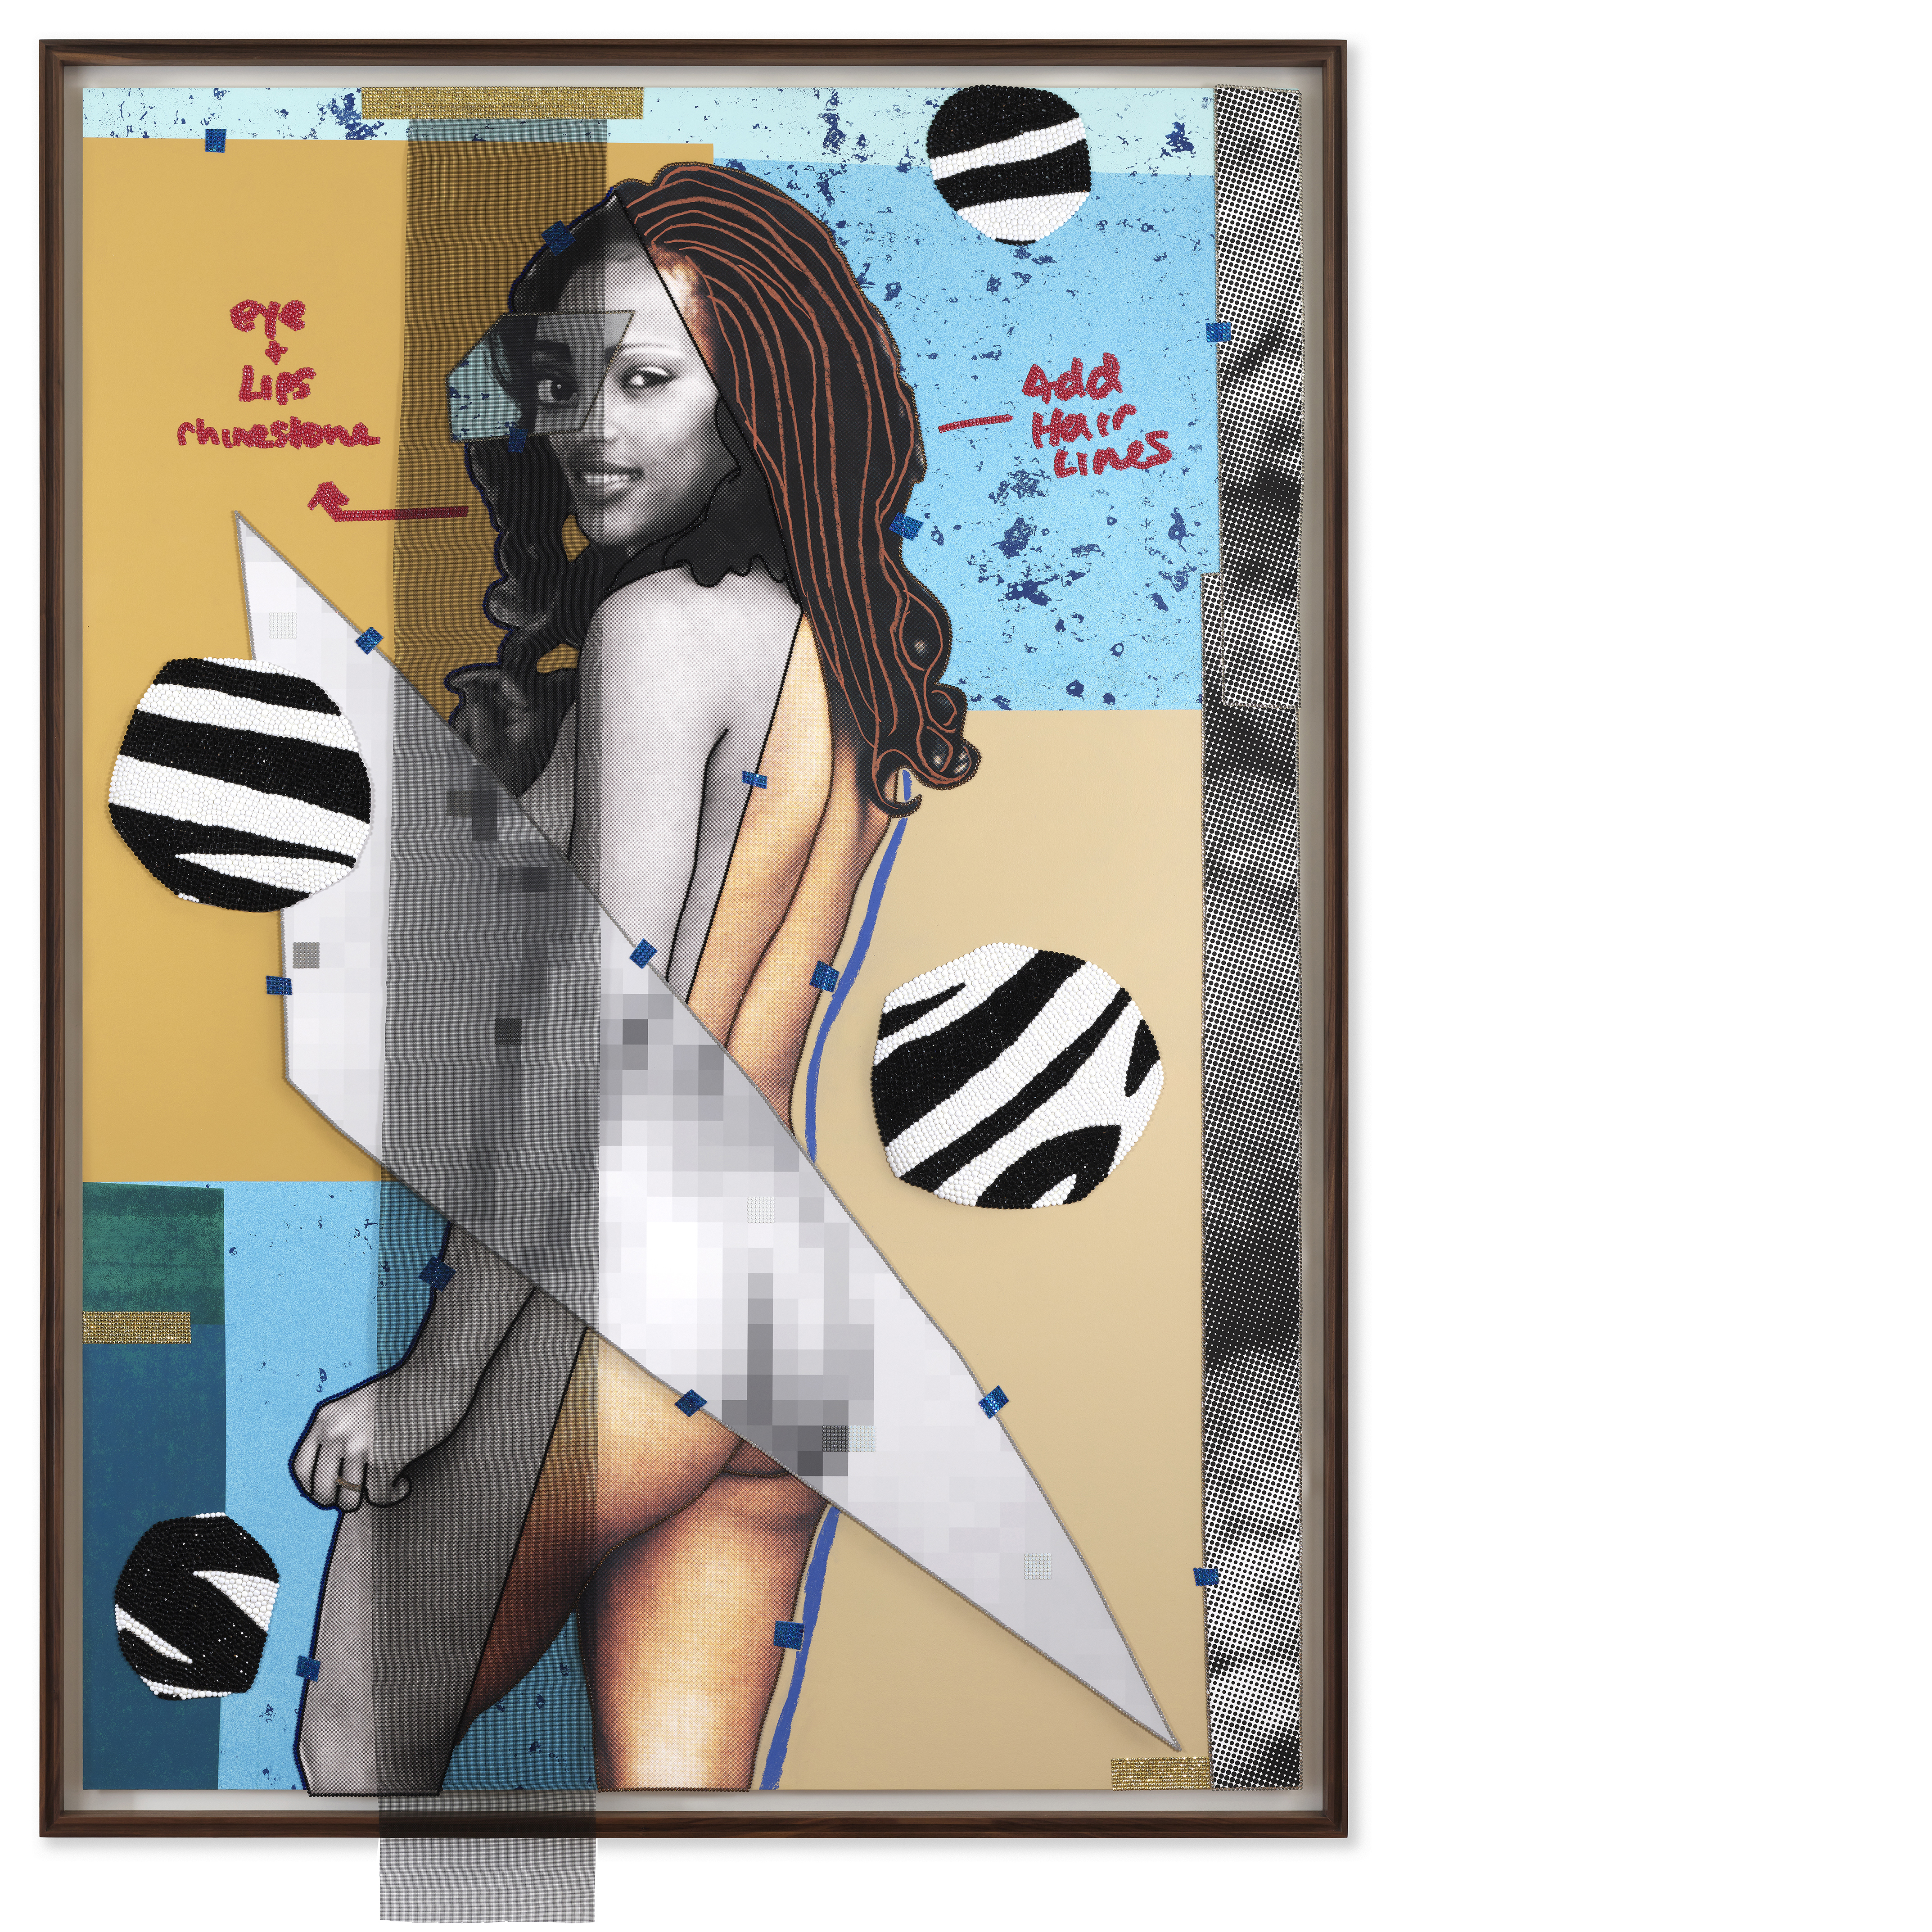 Mickalene Thomas,
Jet Blue #26, 2021,
Rhinestones, fiberglass mesh, acrylic, chalk and oil
pastel, mixed media paper and archival pigment prints
on museum paper mounted on Dibond with a
mahogany frame
88 1/2 x 64 3/8 x 2 inches (224.8 x 163.5 x 5.1 cm)
From top of frame to bottom of mesh
93 3/4 x 64 3/8 x 2 inches (238.1 x 163.5 x 5.1 cm)